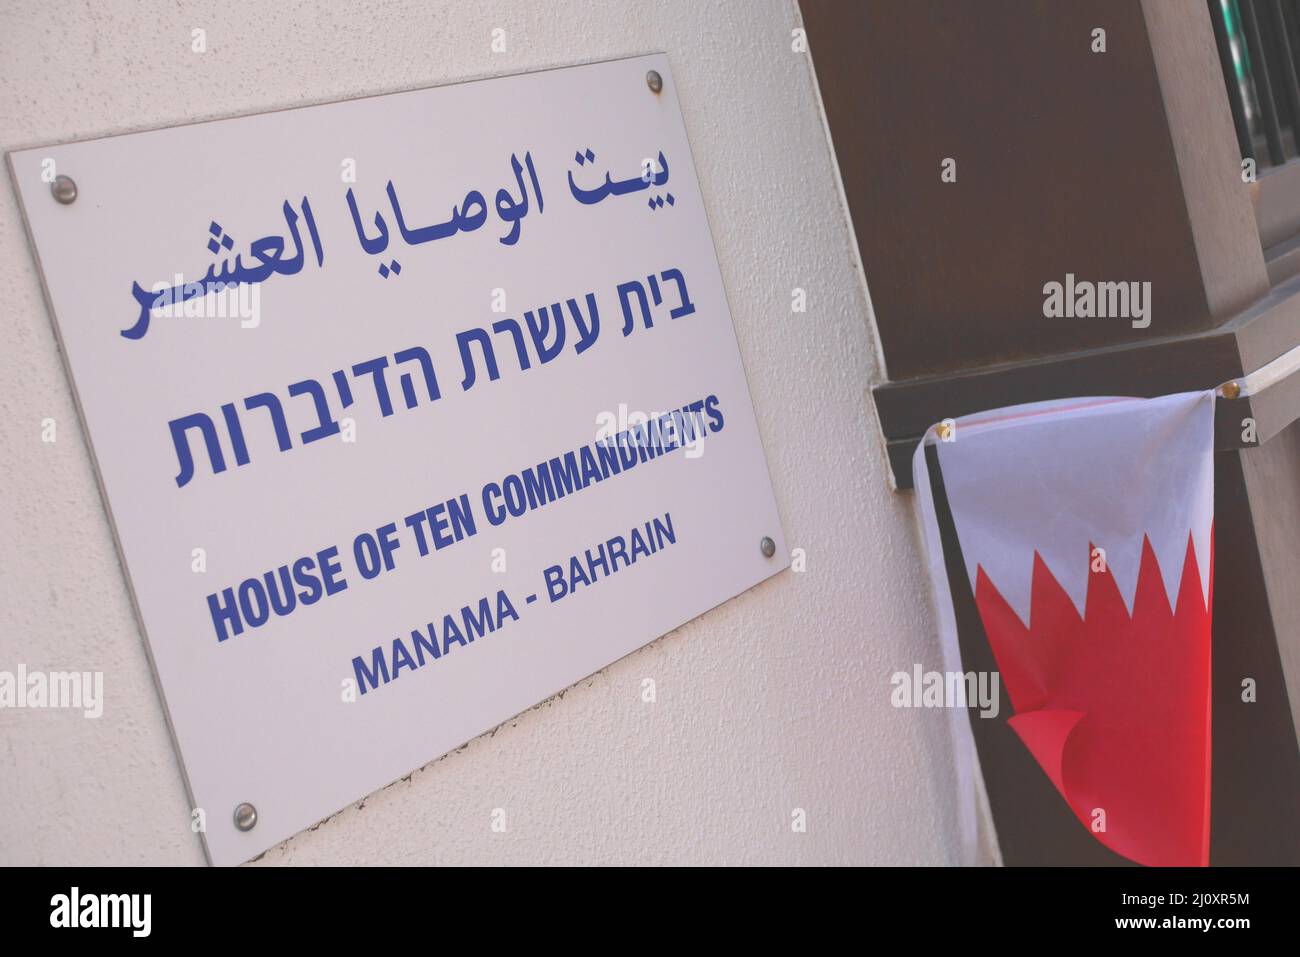 Sign in Arabic, Hebrew and English, and a Bahraini flag outside the House of Ten Commandments synagogue, souk area, Manama, Kingdom of Bahrain Stock Photo